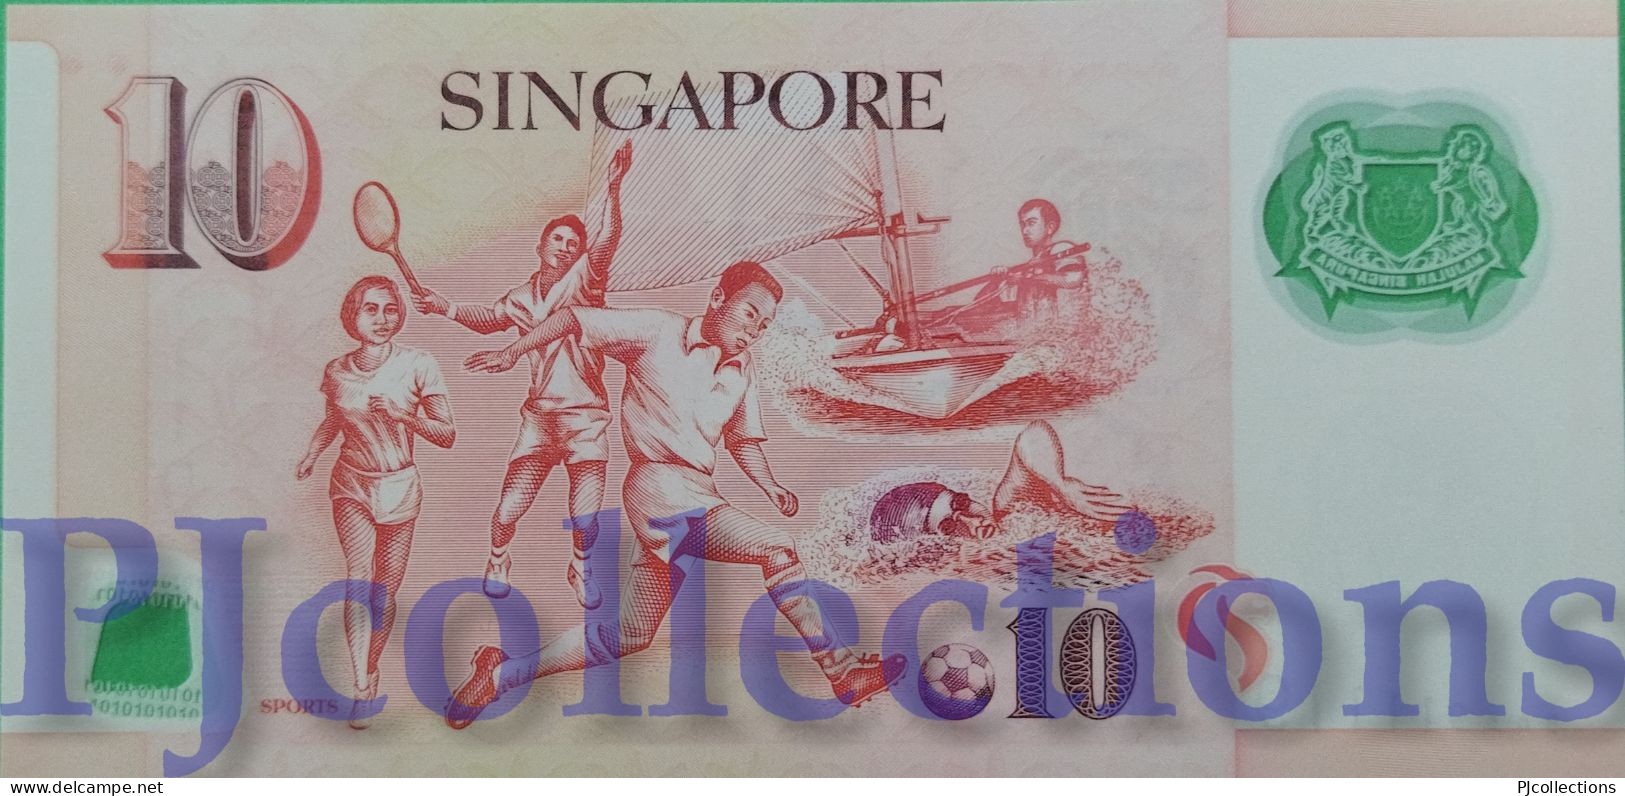 SINGAPORE 10 DOLLARS 2005 PICK 48a POLYMER UNC GOOD SERIAL NUMBER "9AA 911119" - Singapour